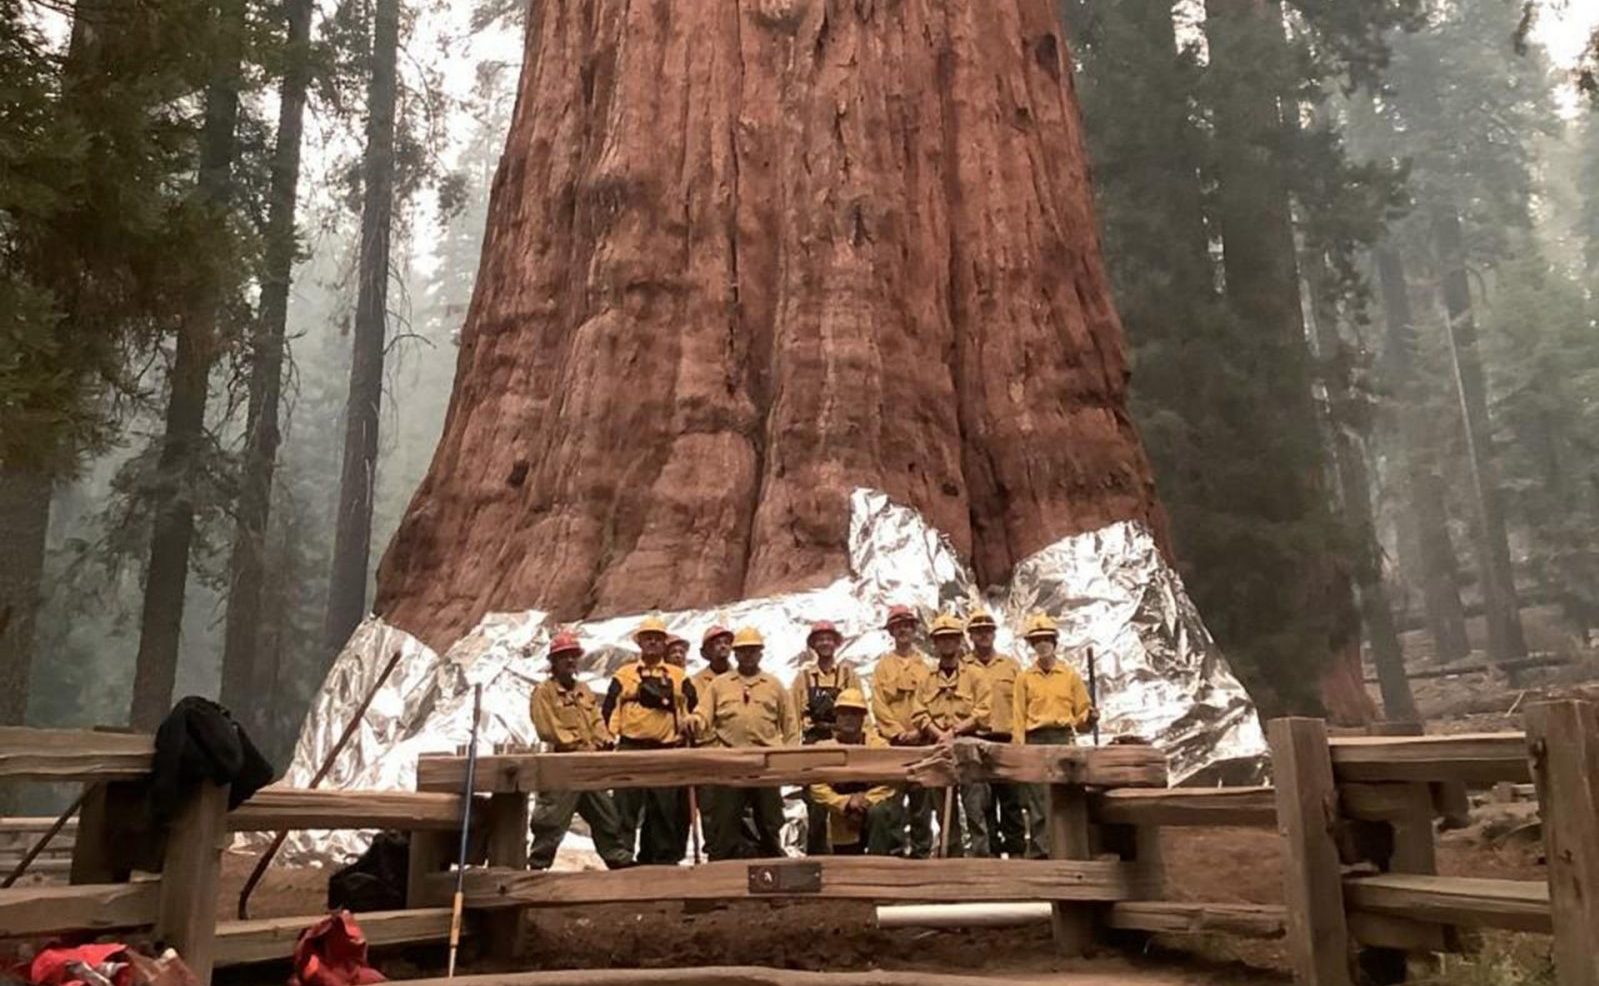 epa09474401 A handout photo made available by the National Park Service shows firefighters posing next to The General Sherman Tree after wrapping it in fire-resistant structural wrap amid the KNP Complex Fire within the Sequoia National Forest near Three Rivers, California, USA, 17 September 2021. The KNP Complex Fire, comprising the Colony and Paradise Fires, has already scorched more than 4,600 hectares and is threatening the giant sequoia known as General Sherman, the biggest tree in the world.  EPA/National Park Service HANDOUT  HANDOUT EDITORIAL USE ONLY/NO SALES